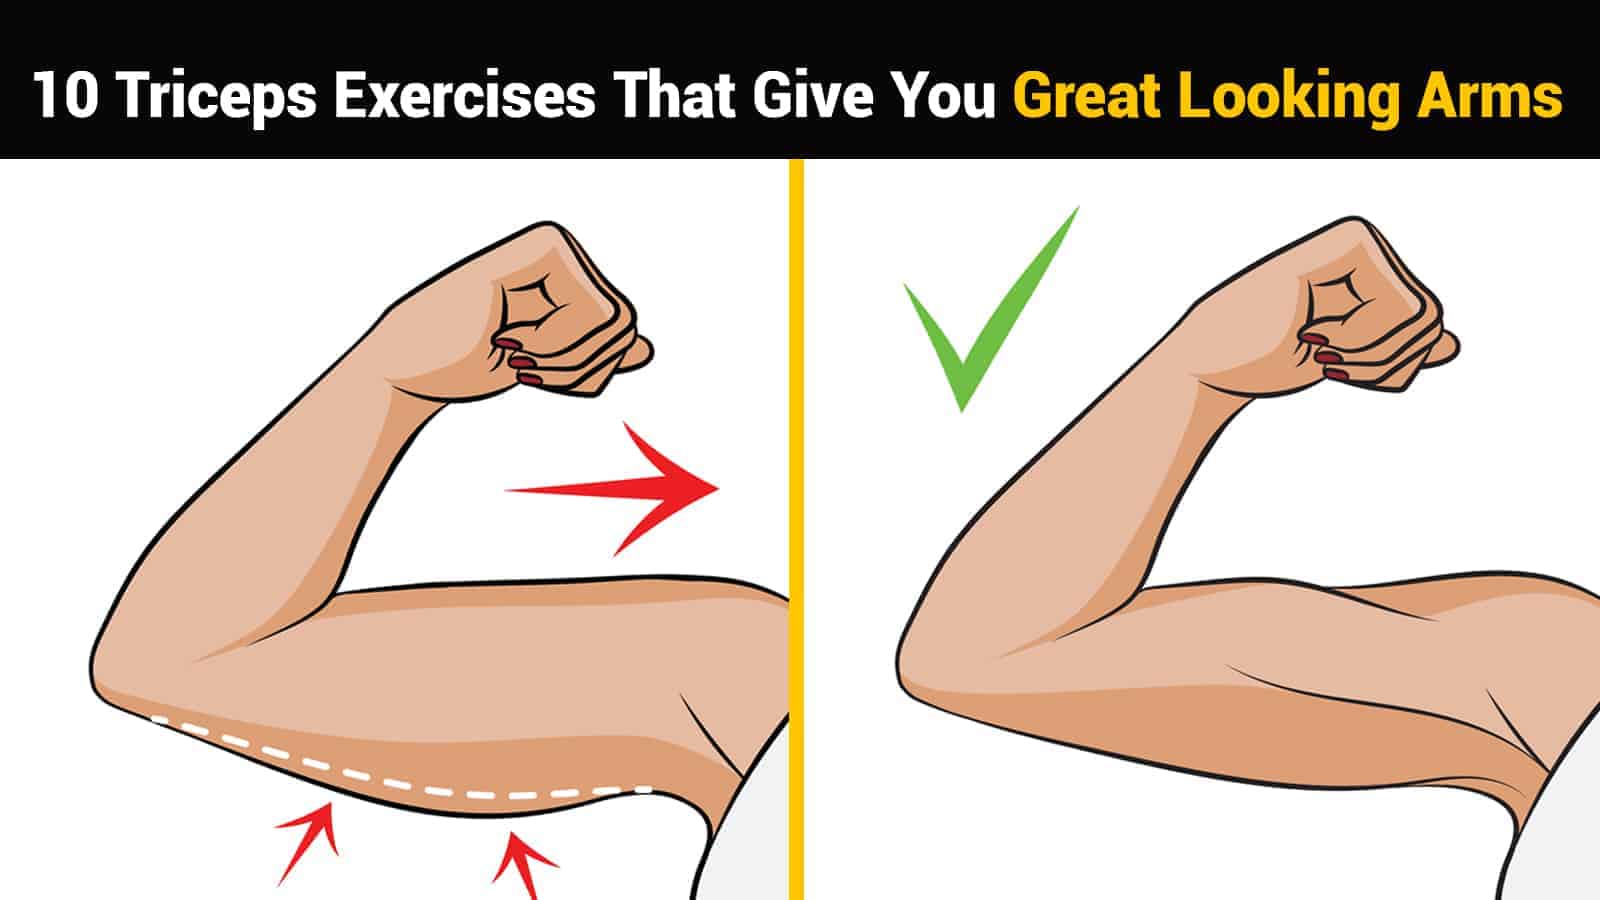 10 Tricep Exercises That Give You Great Looking Arms